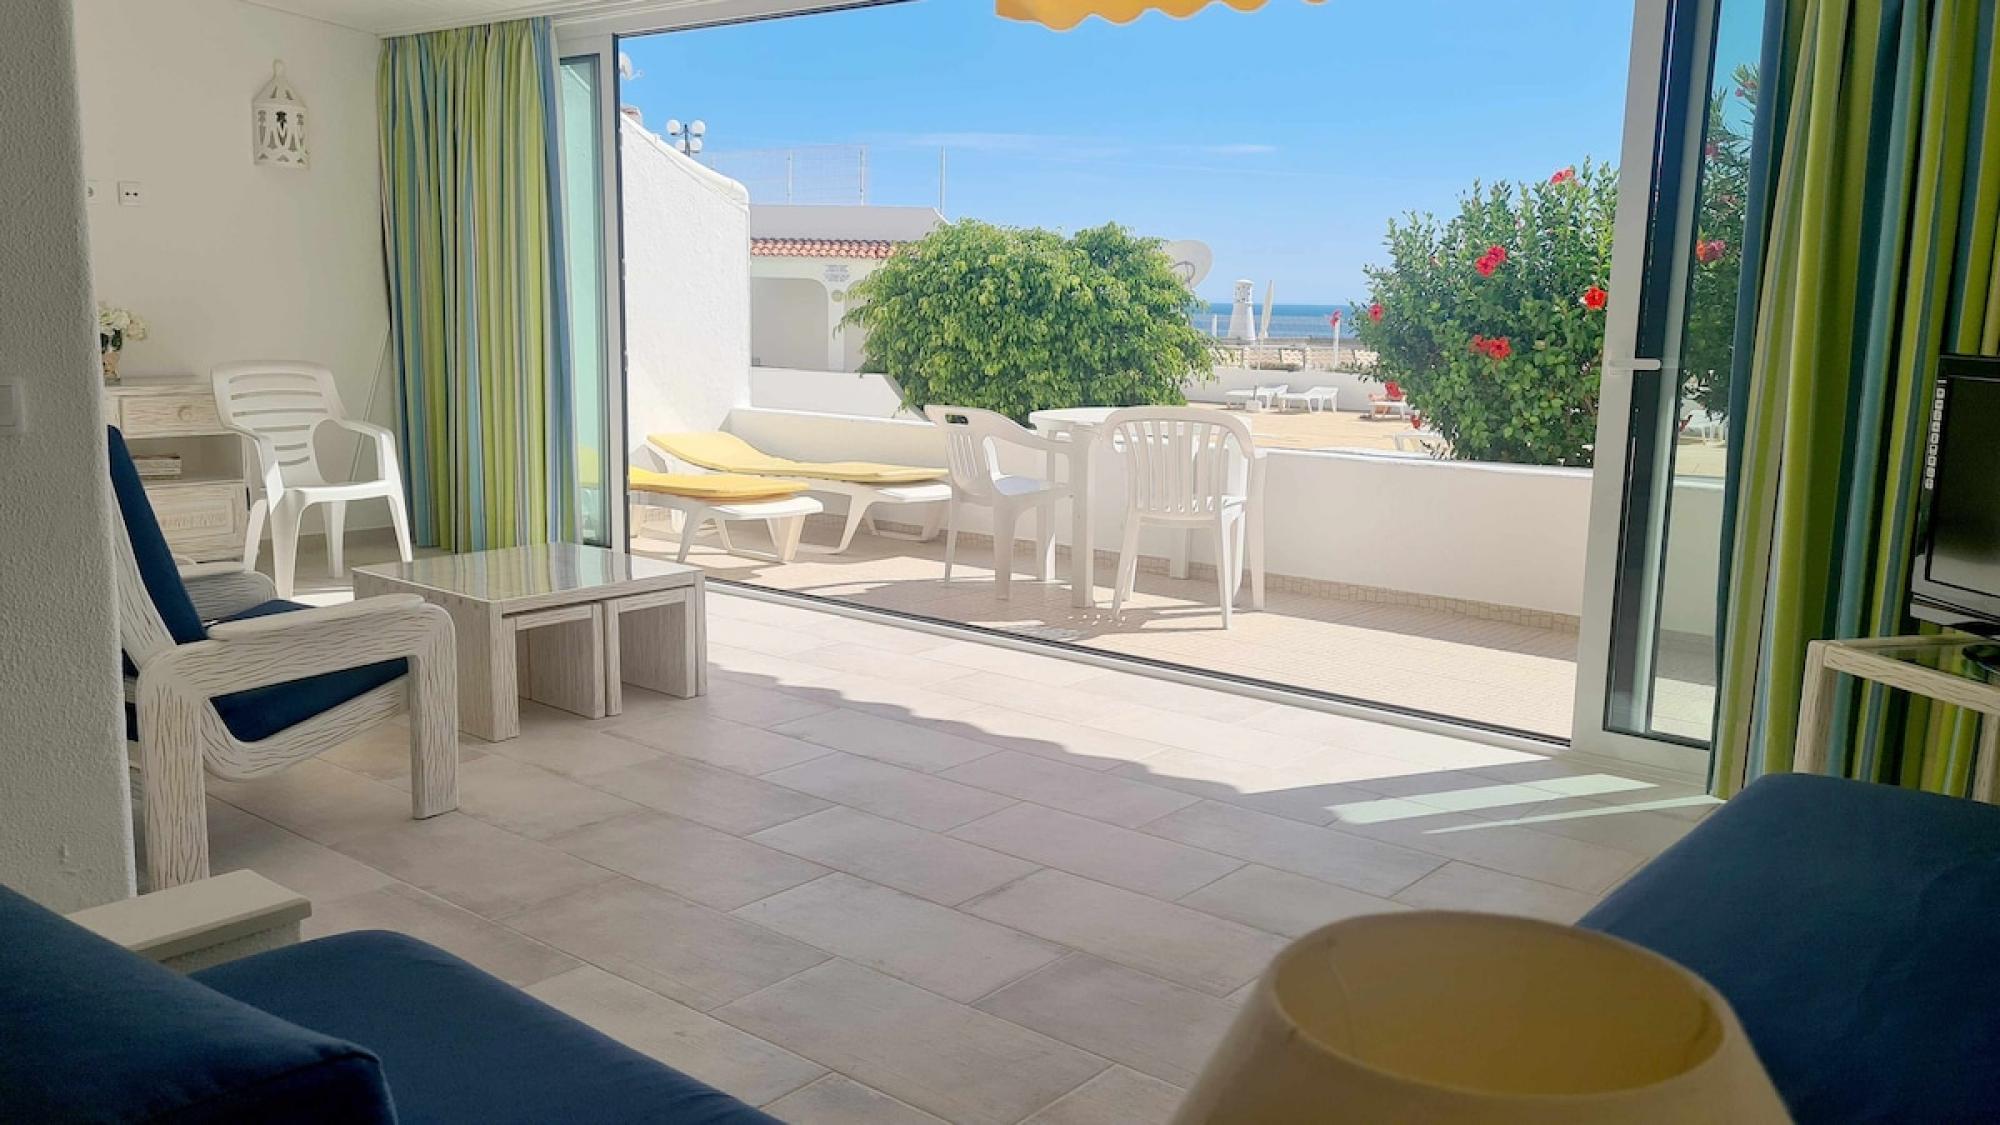 Property Image 1 - Albufeira  with terrace  sea views  5 min to beach  21 